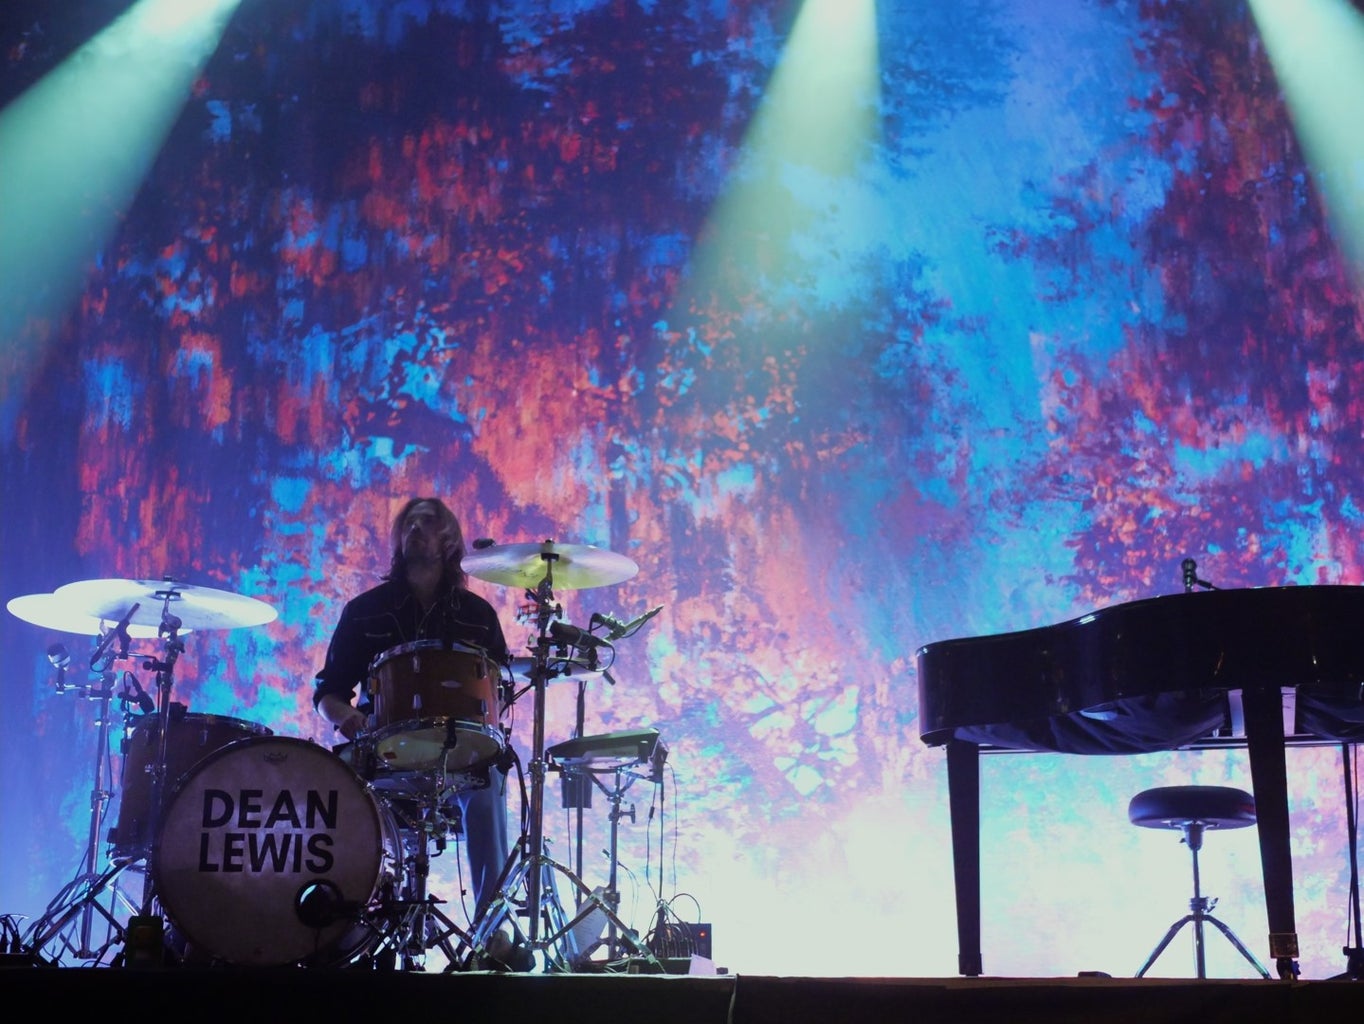 silhouette of drummer in front of a backdrop with blue and pink hues silhouette of drummer in front of a backdrop with blue and pink hues